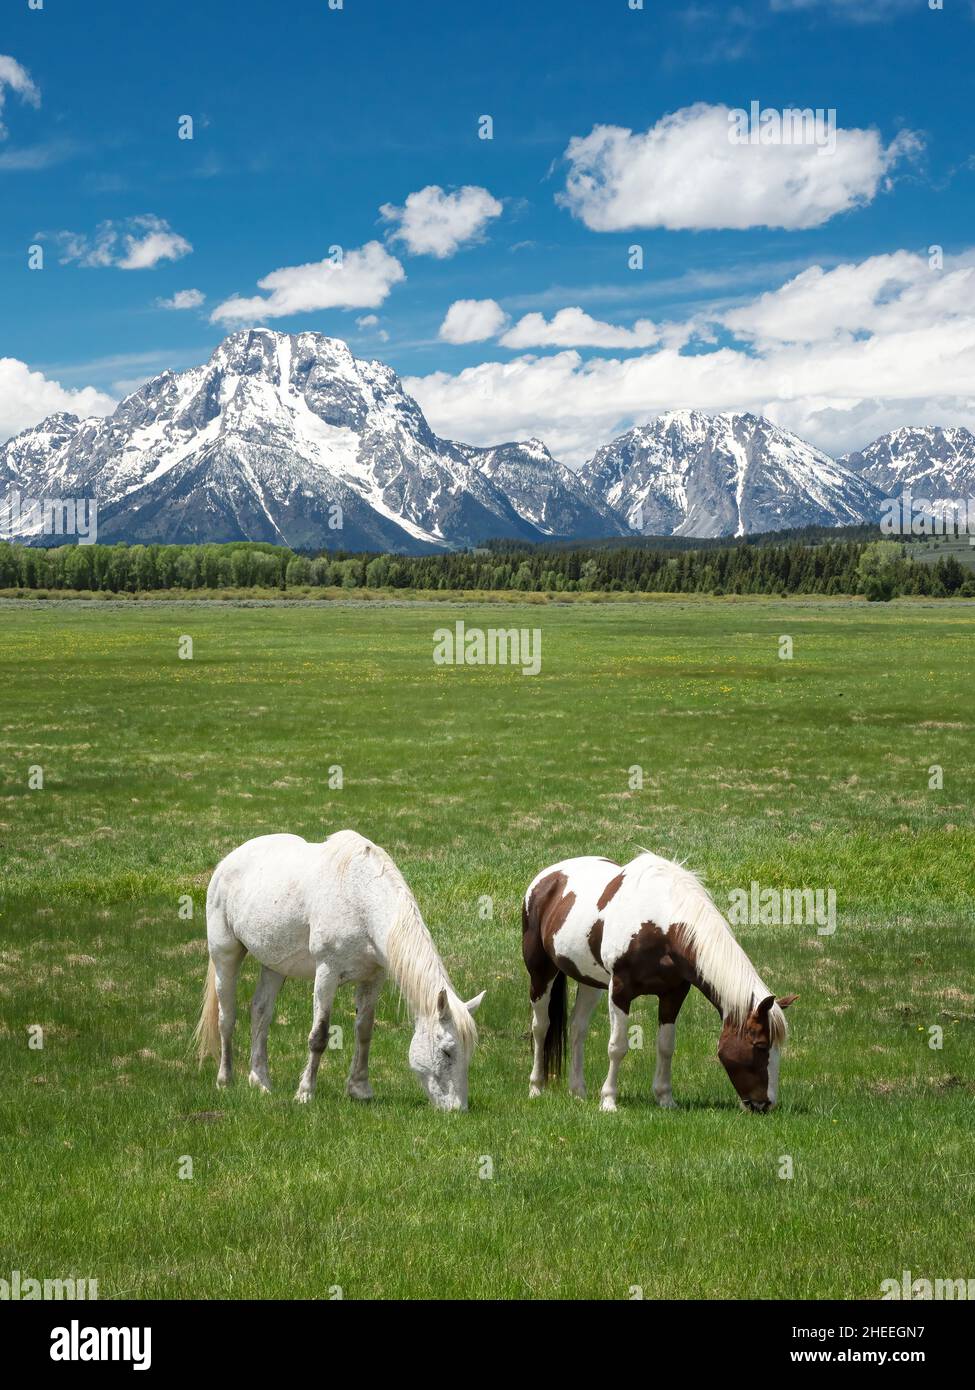 Adult horses, Equus ferus caballus, grazing at the foot of the Grand Teton Mountains, Wyoming. Stock Photo